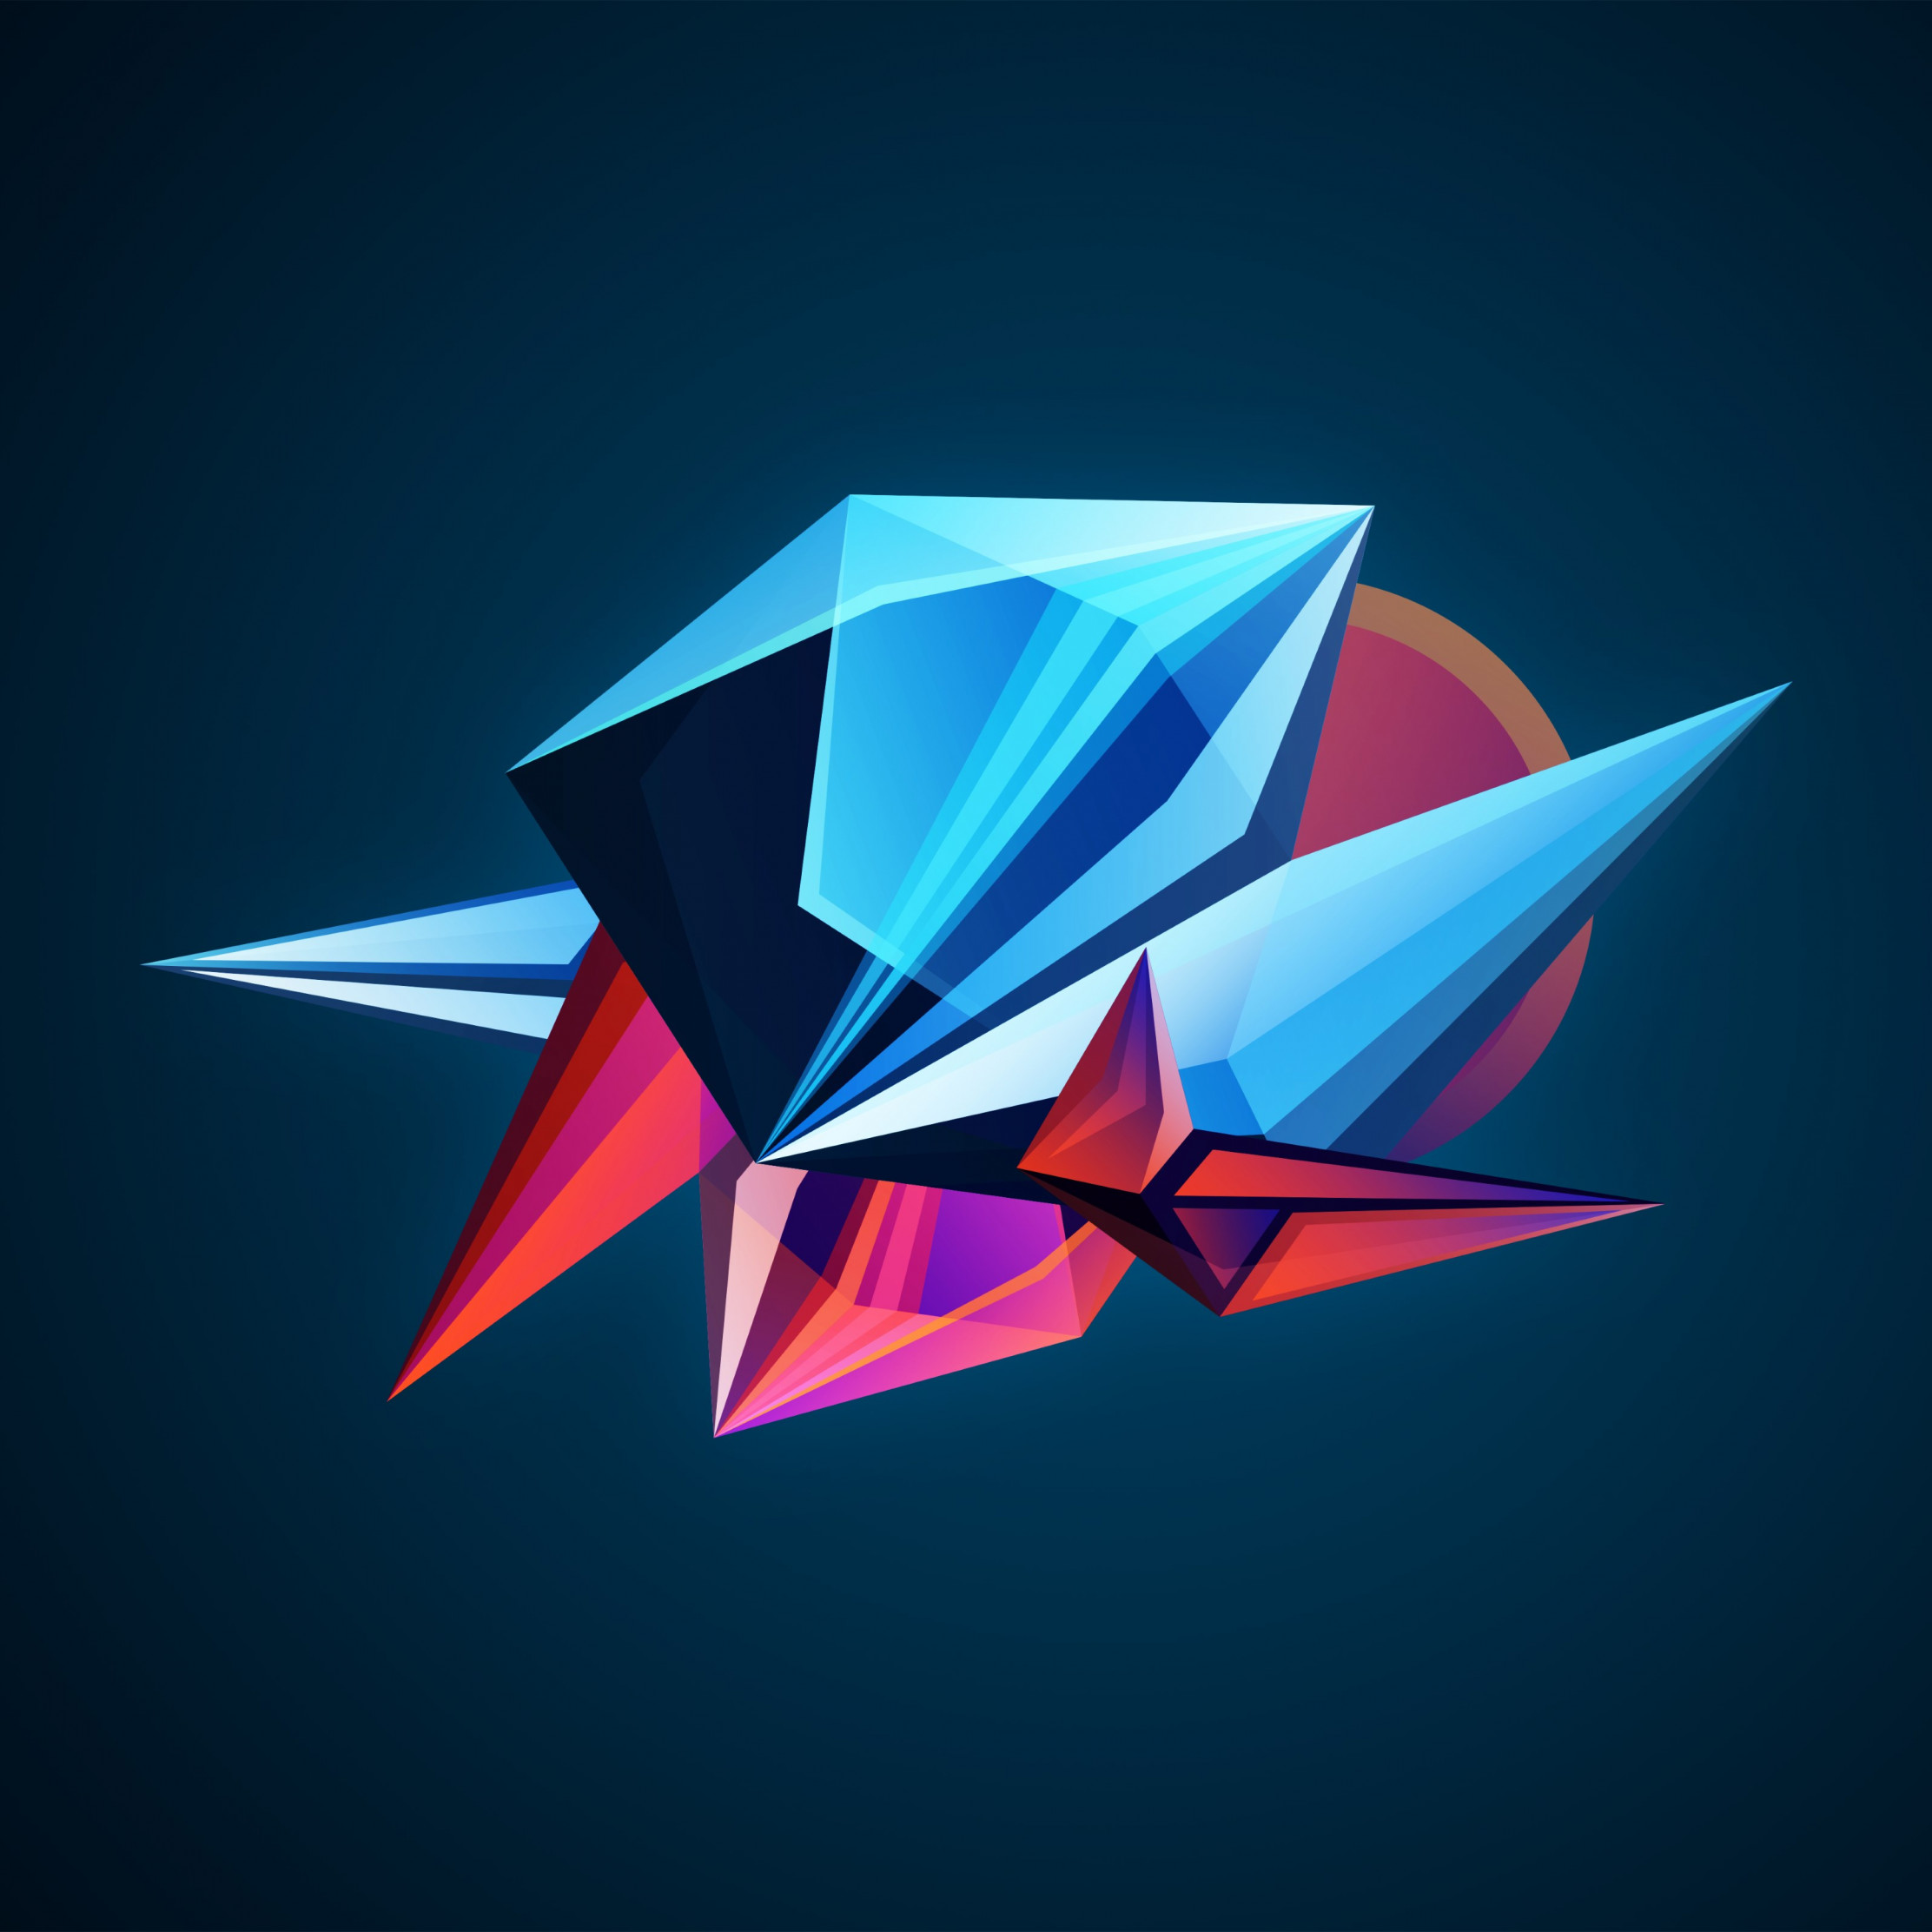 Abstract 3D shapes wallpaper 2224x2224